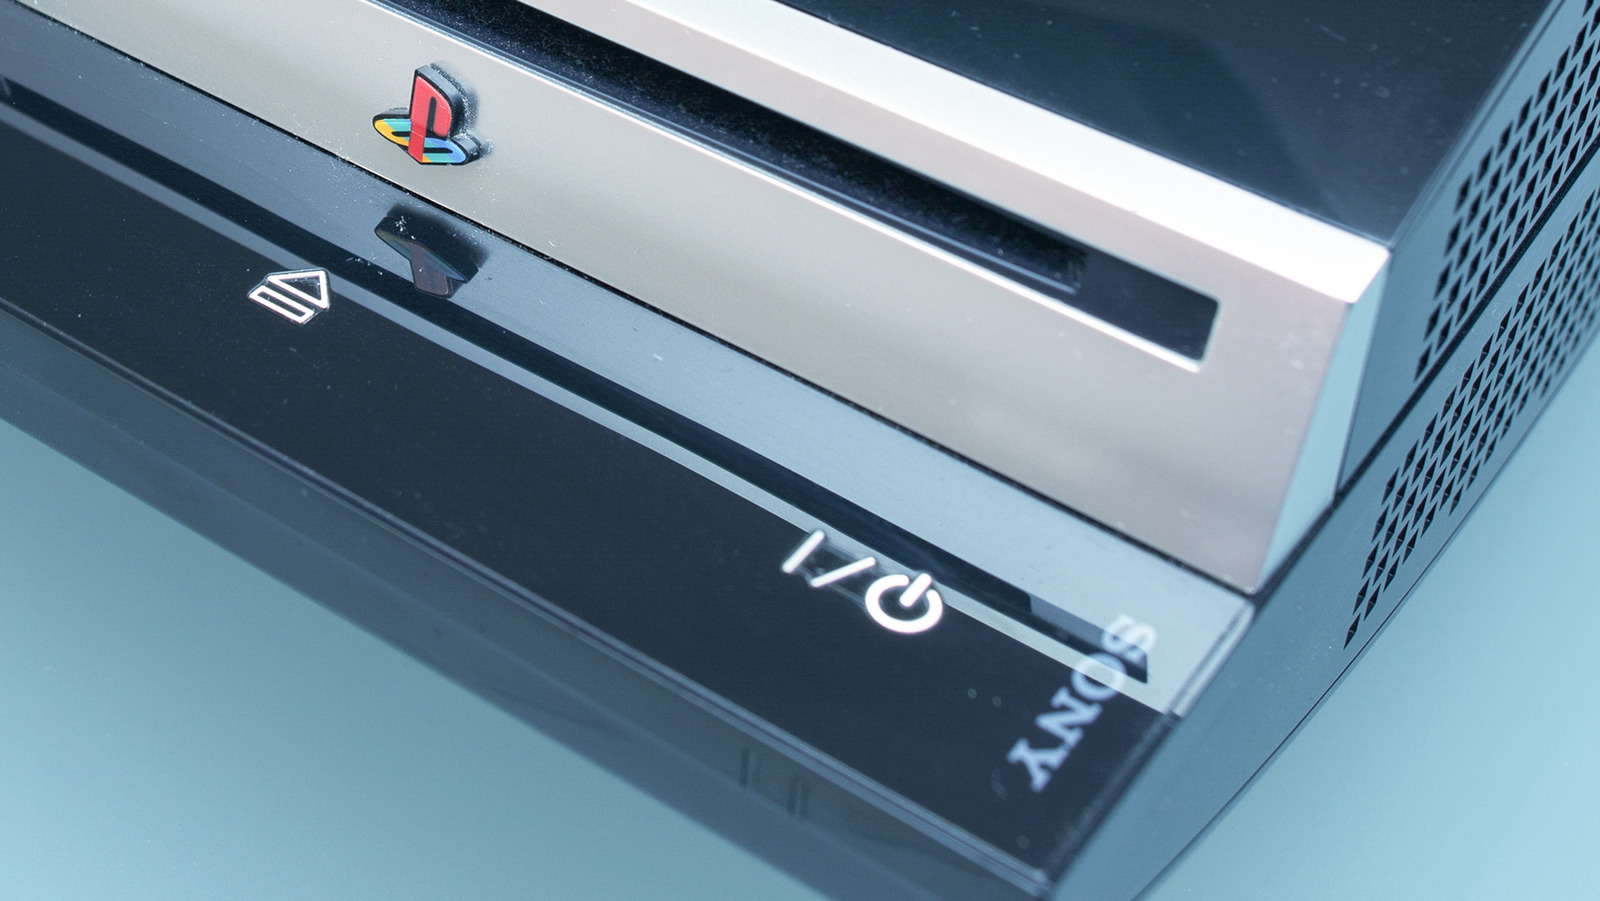 5 Forgotten PS3 Features That Are Pure Nostalgia